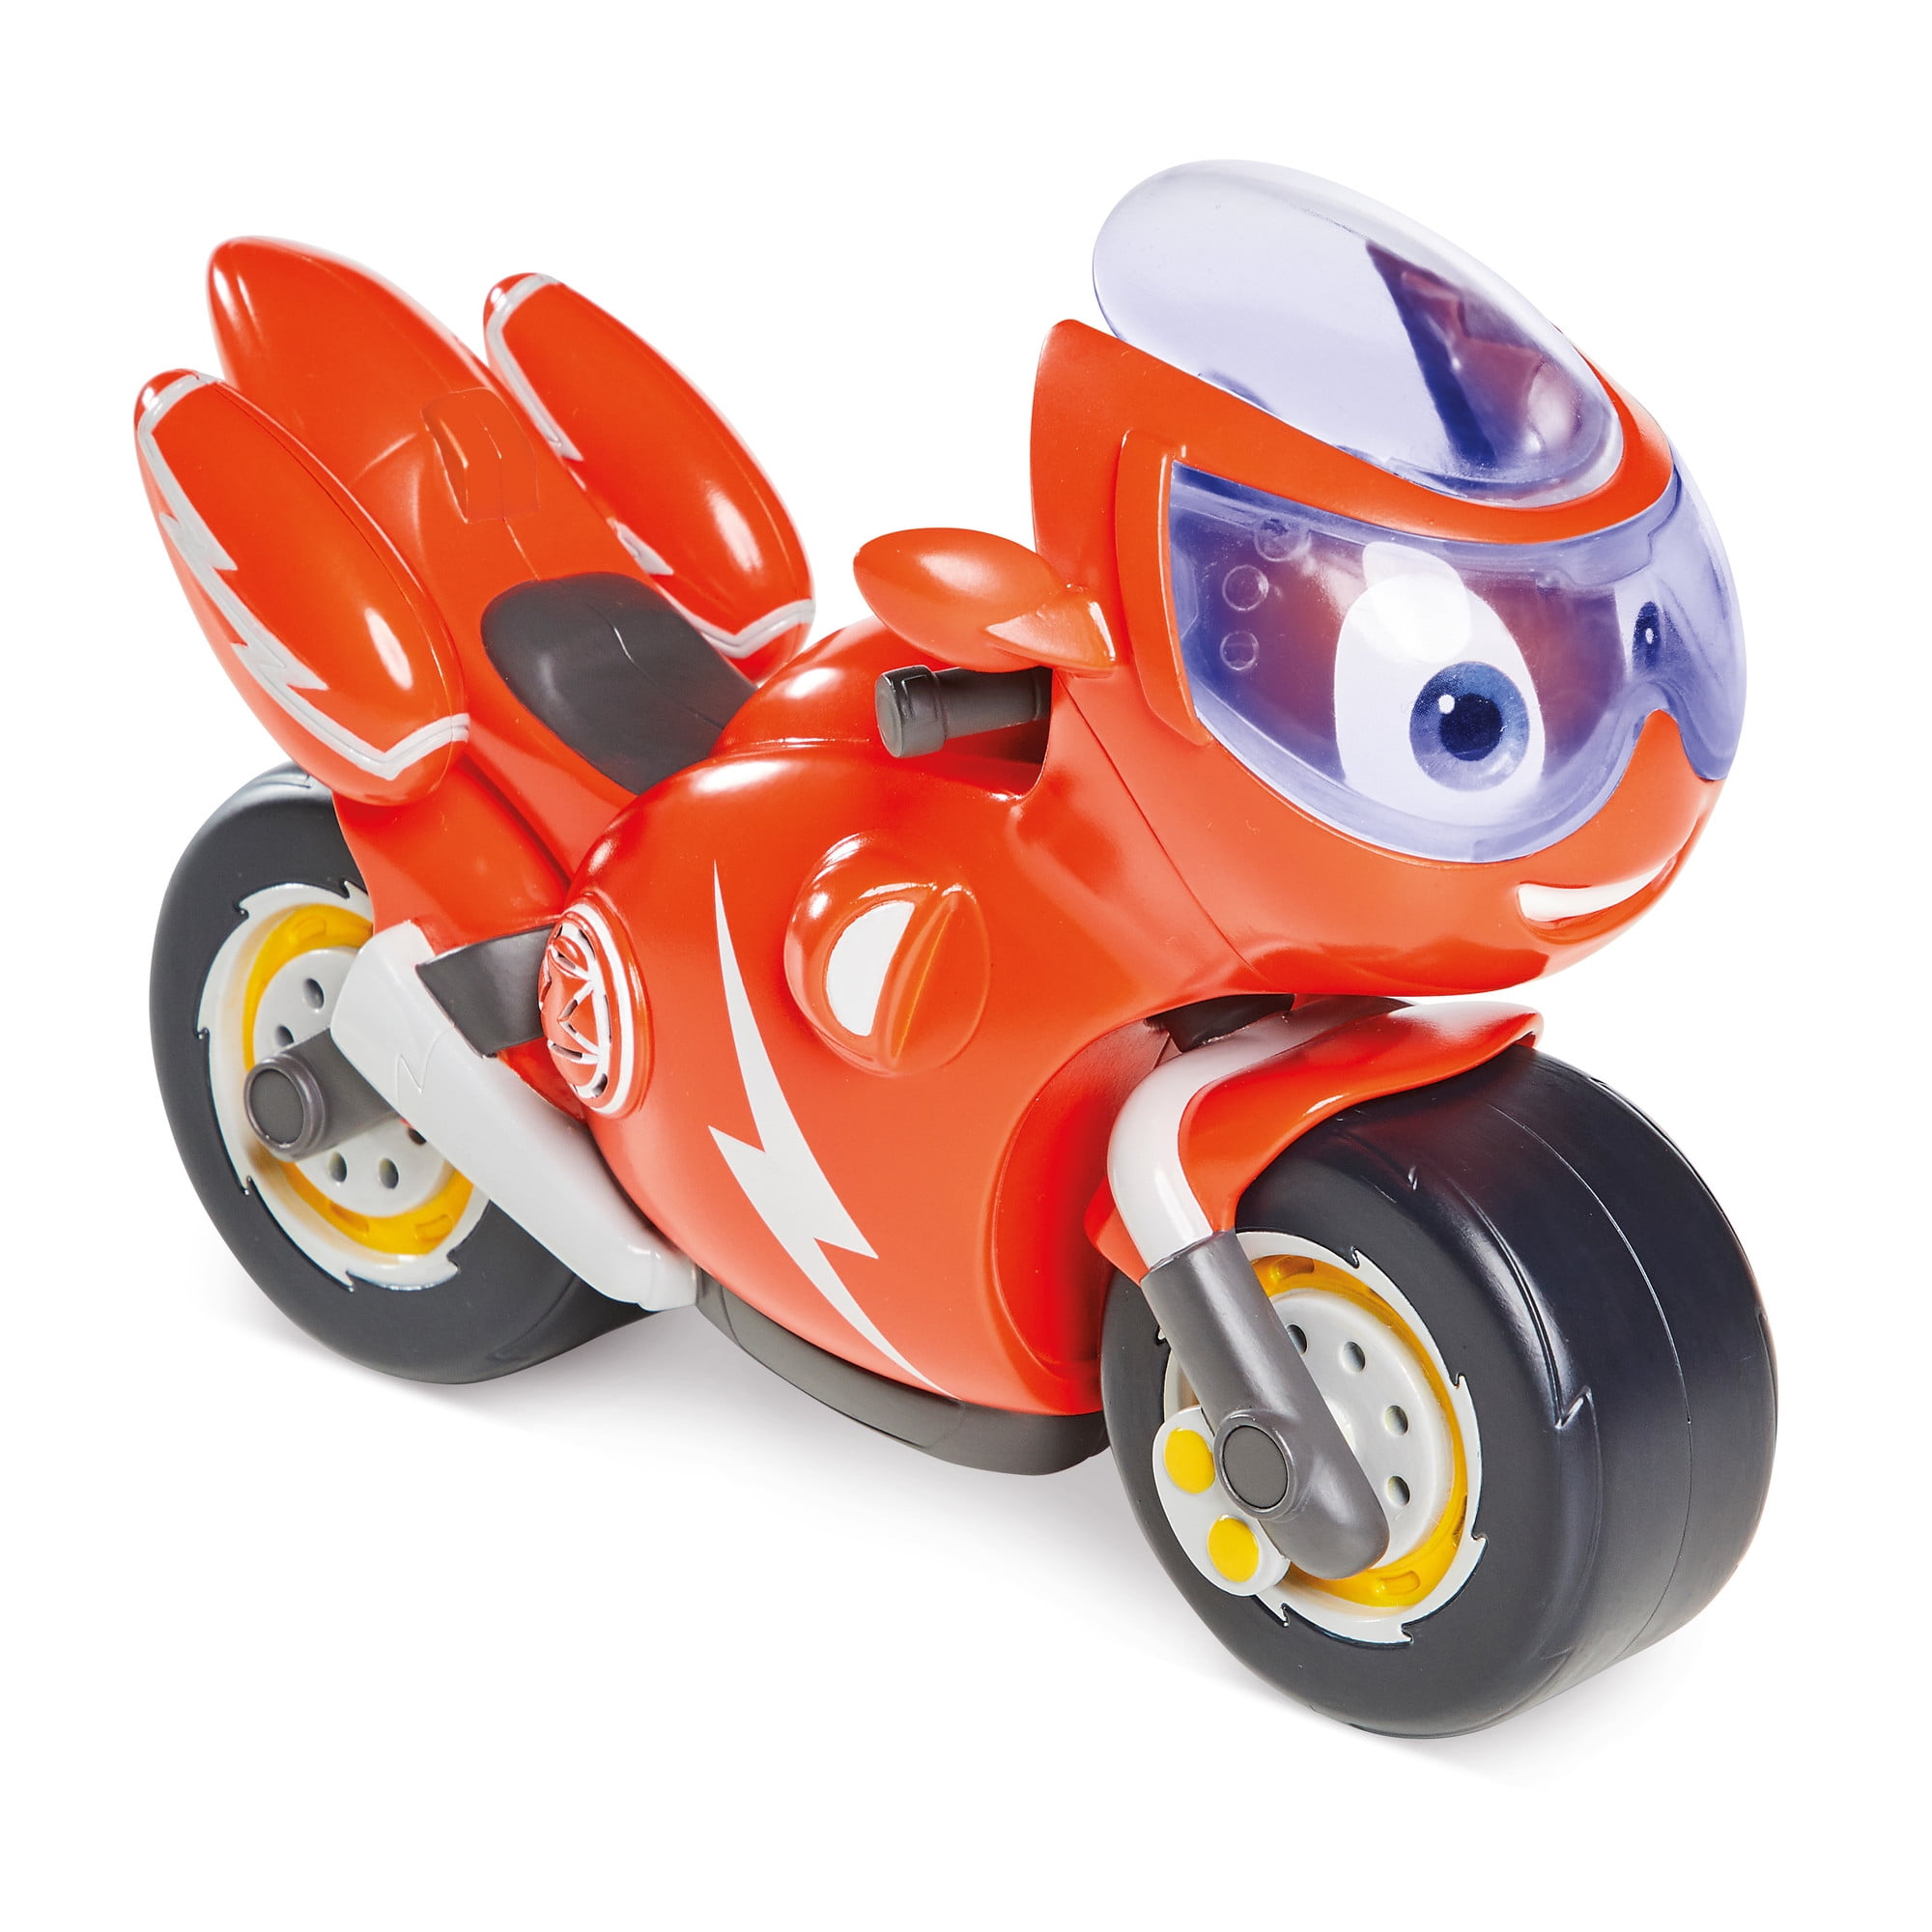 Red Ricky Zoom Toy Motorcycle with Light and Sounds 